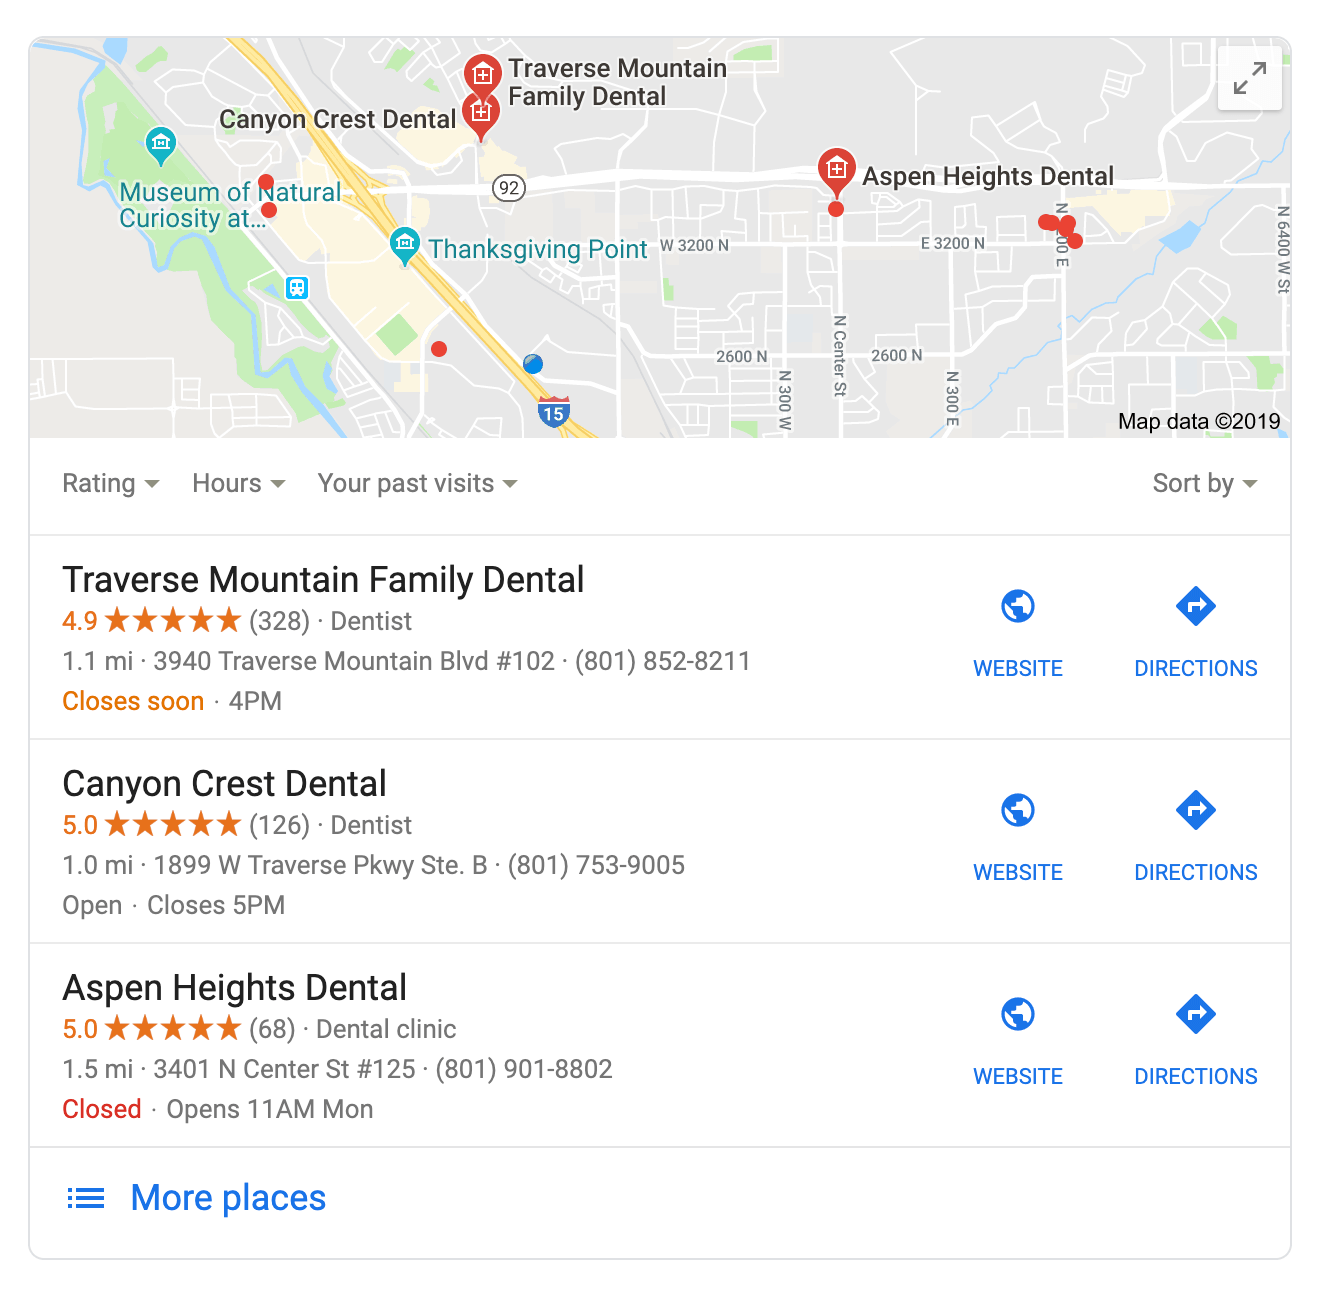 Dominate local SEO with our local focused optimization including Google Business Profile optimizations